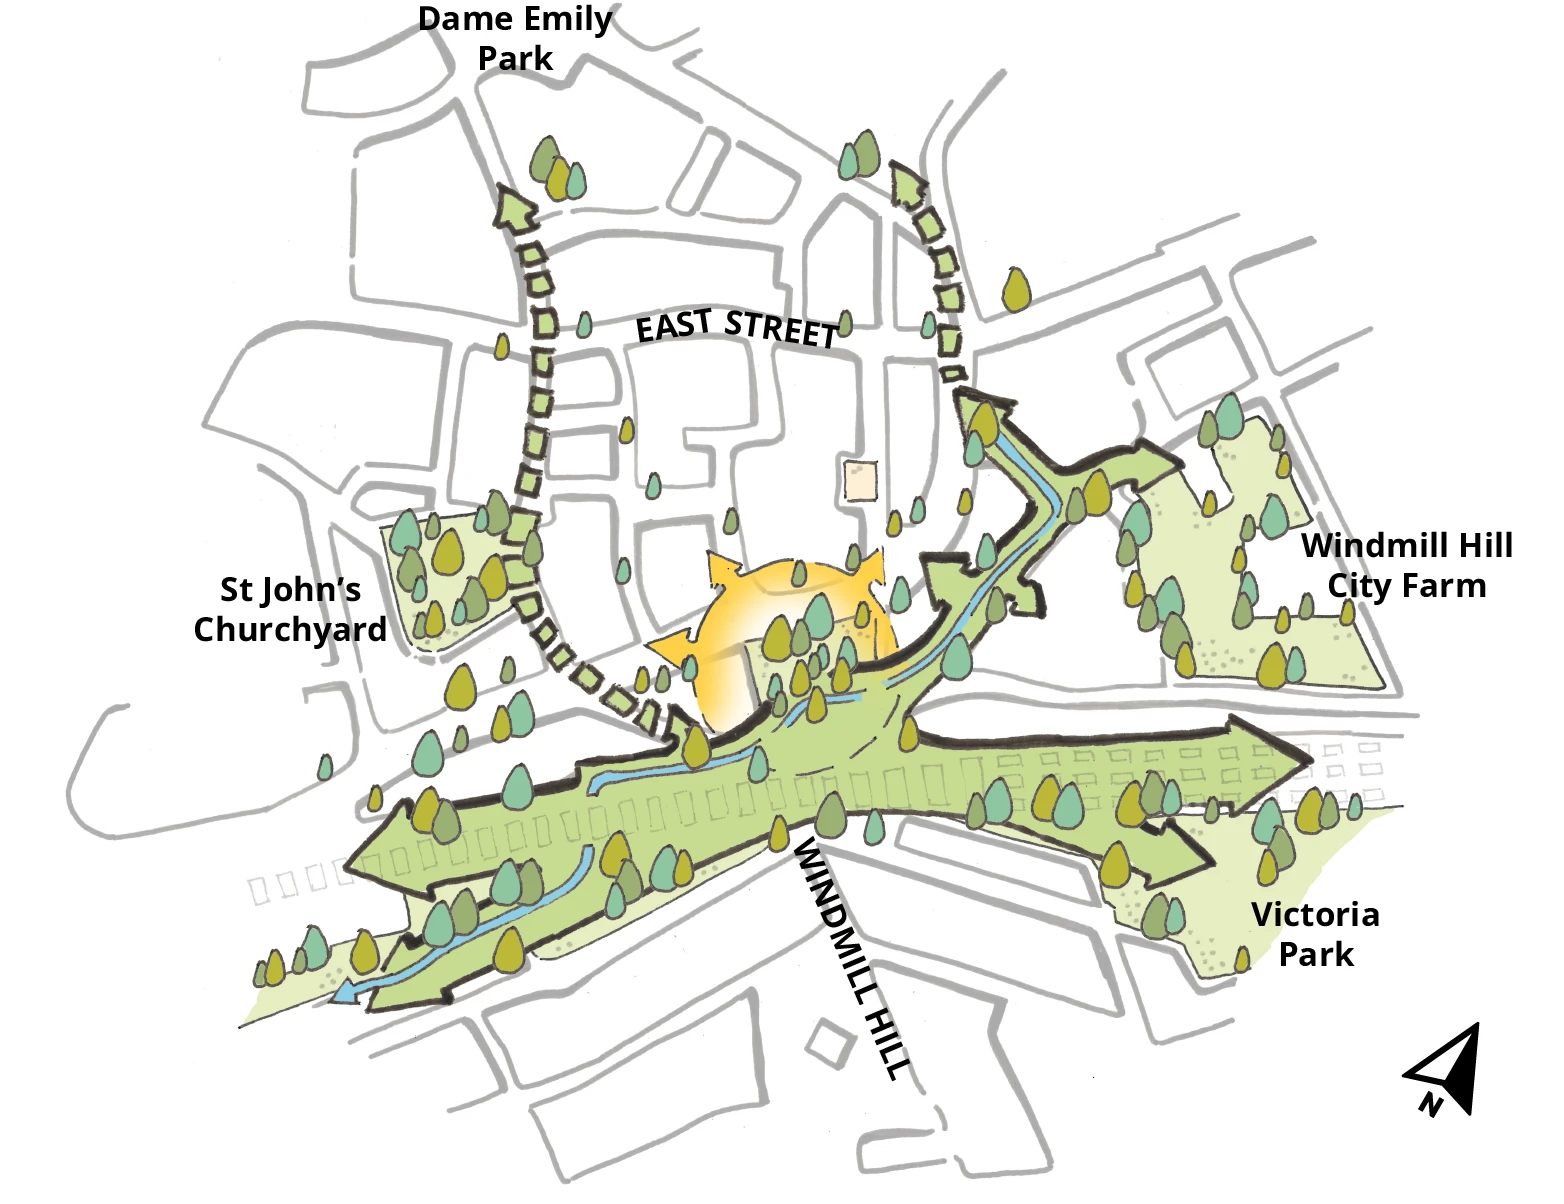 The base of this diagram, which is the same for all the framework diagrams, is a hand drawing showing the urban blocks of the wider Bedminster Green area – East Street is towards the top of the image, Dalby Avenue is in the middle, the railway and Bedminster station is below that and Windmill Hill is at the bottom. A green area with multiple arrow heads runs along the railway line and Dalby Avenue with the arrow heads pointing to existing open spaces like Victoria Park and Windmill Hill City Farm. The proposed route of the River Malago in blue, shown on top of the green base. There are smaller, dashed green arrows that run from the green shape at the bottom up towards East Street.